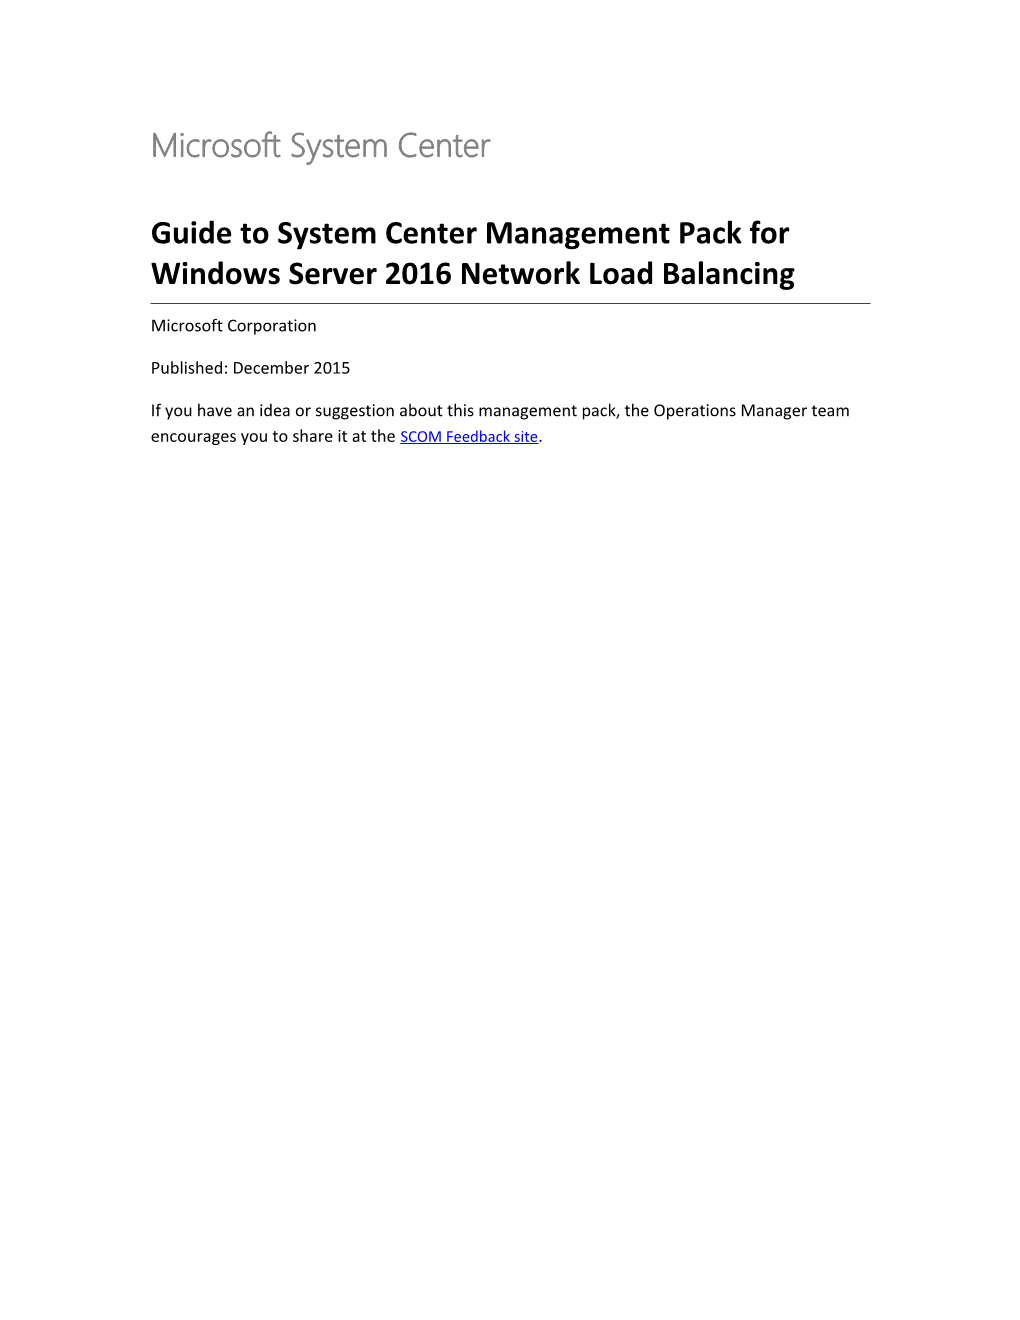 Guide to System Center Management Pack for Windows Server 2016 Network Load Balancing